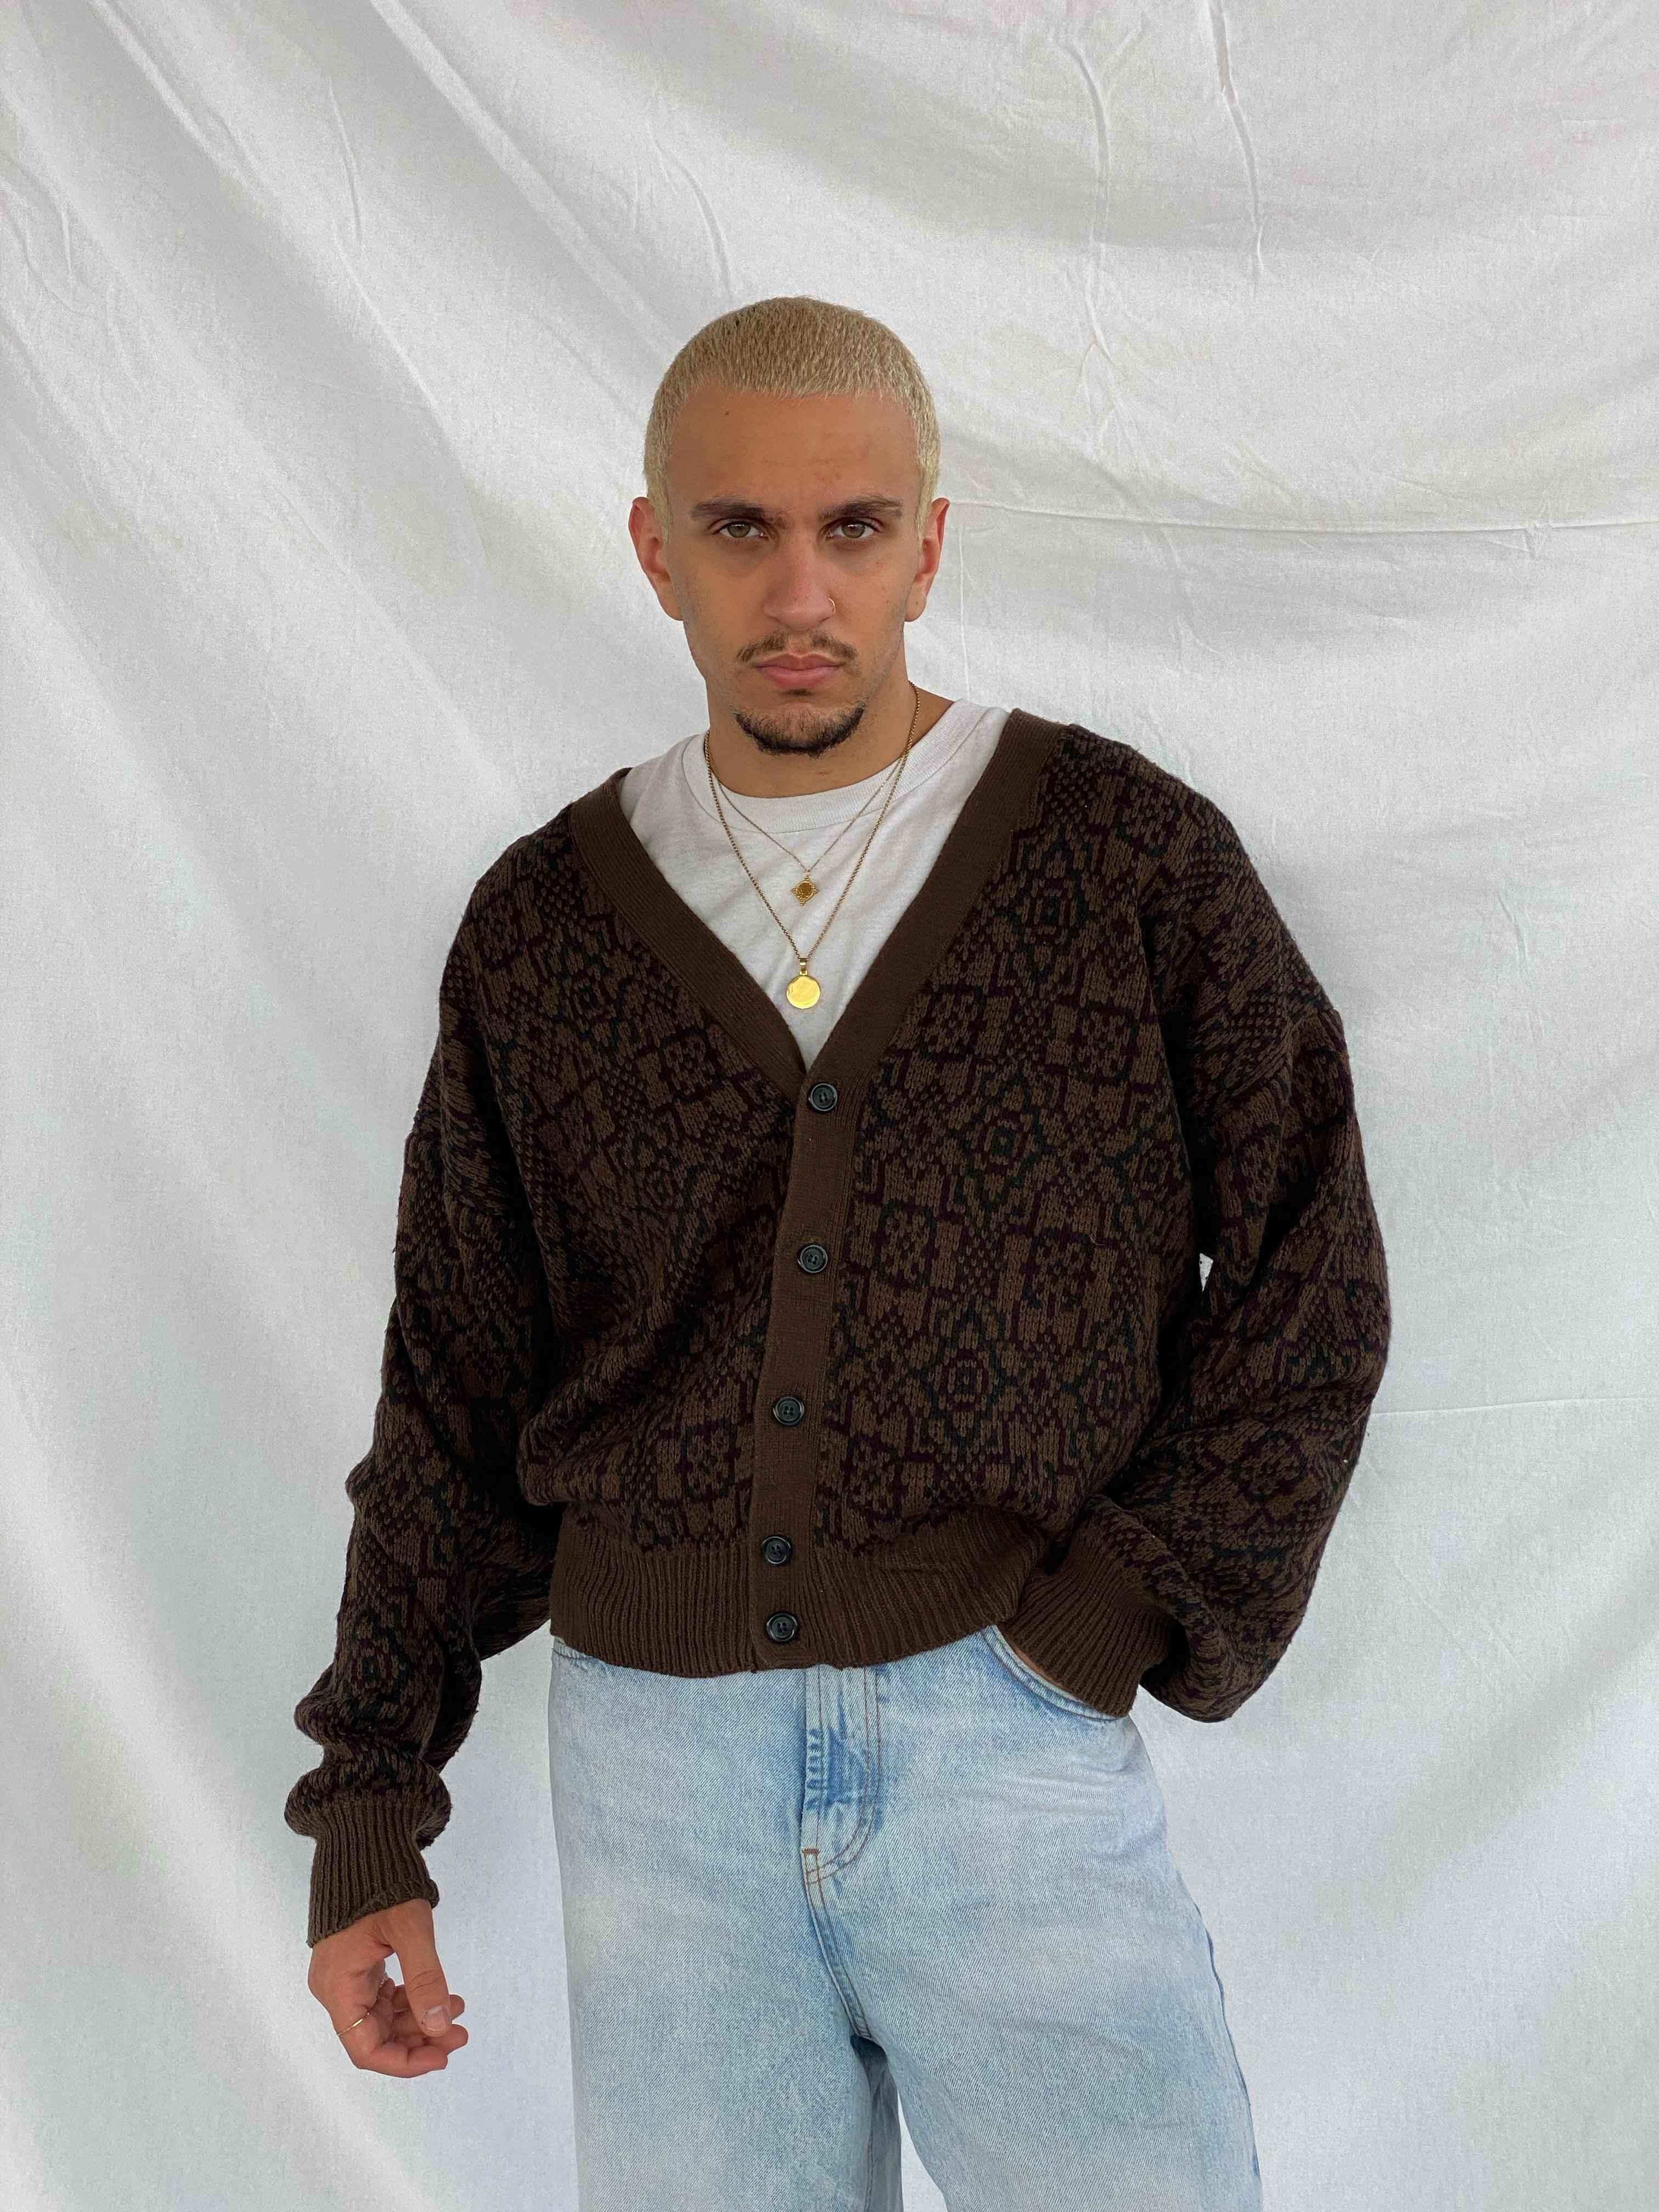 Vintage 90s Blair Knitted Cardigan Sweater - Balagan Vintage Sweater 90s, knitted, knitted cardigan, knitted sweater, men, streetwear, vintage, vintage sweater, winter